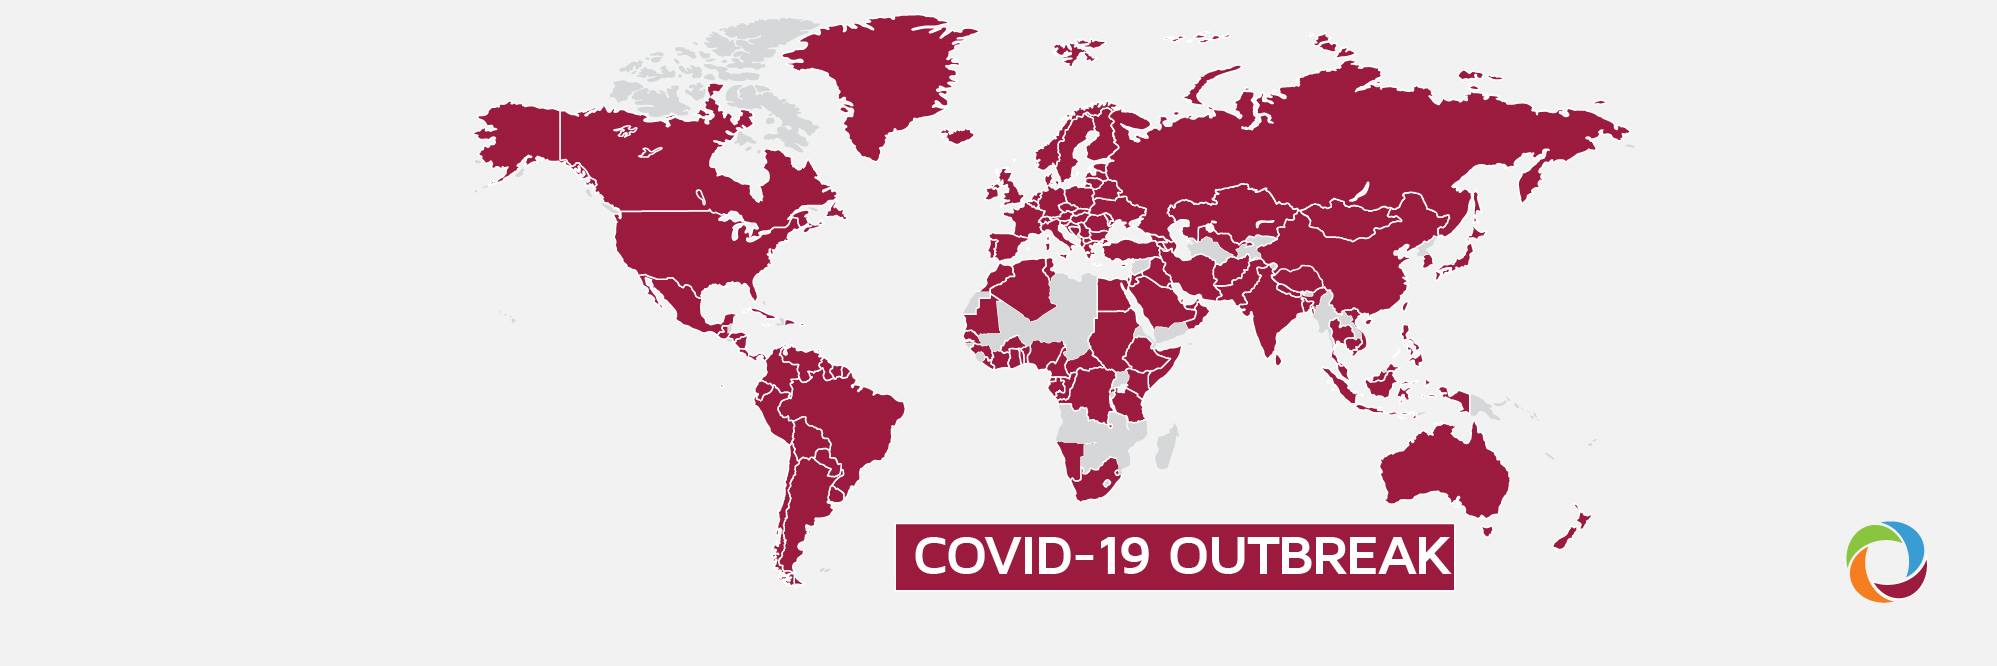 Weekly review of the coronavirus situation across the world